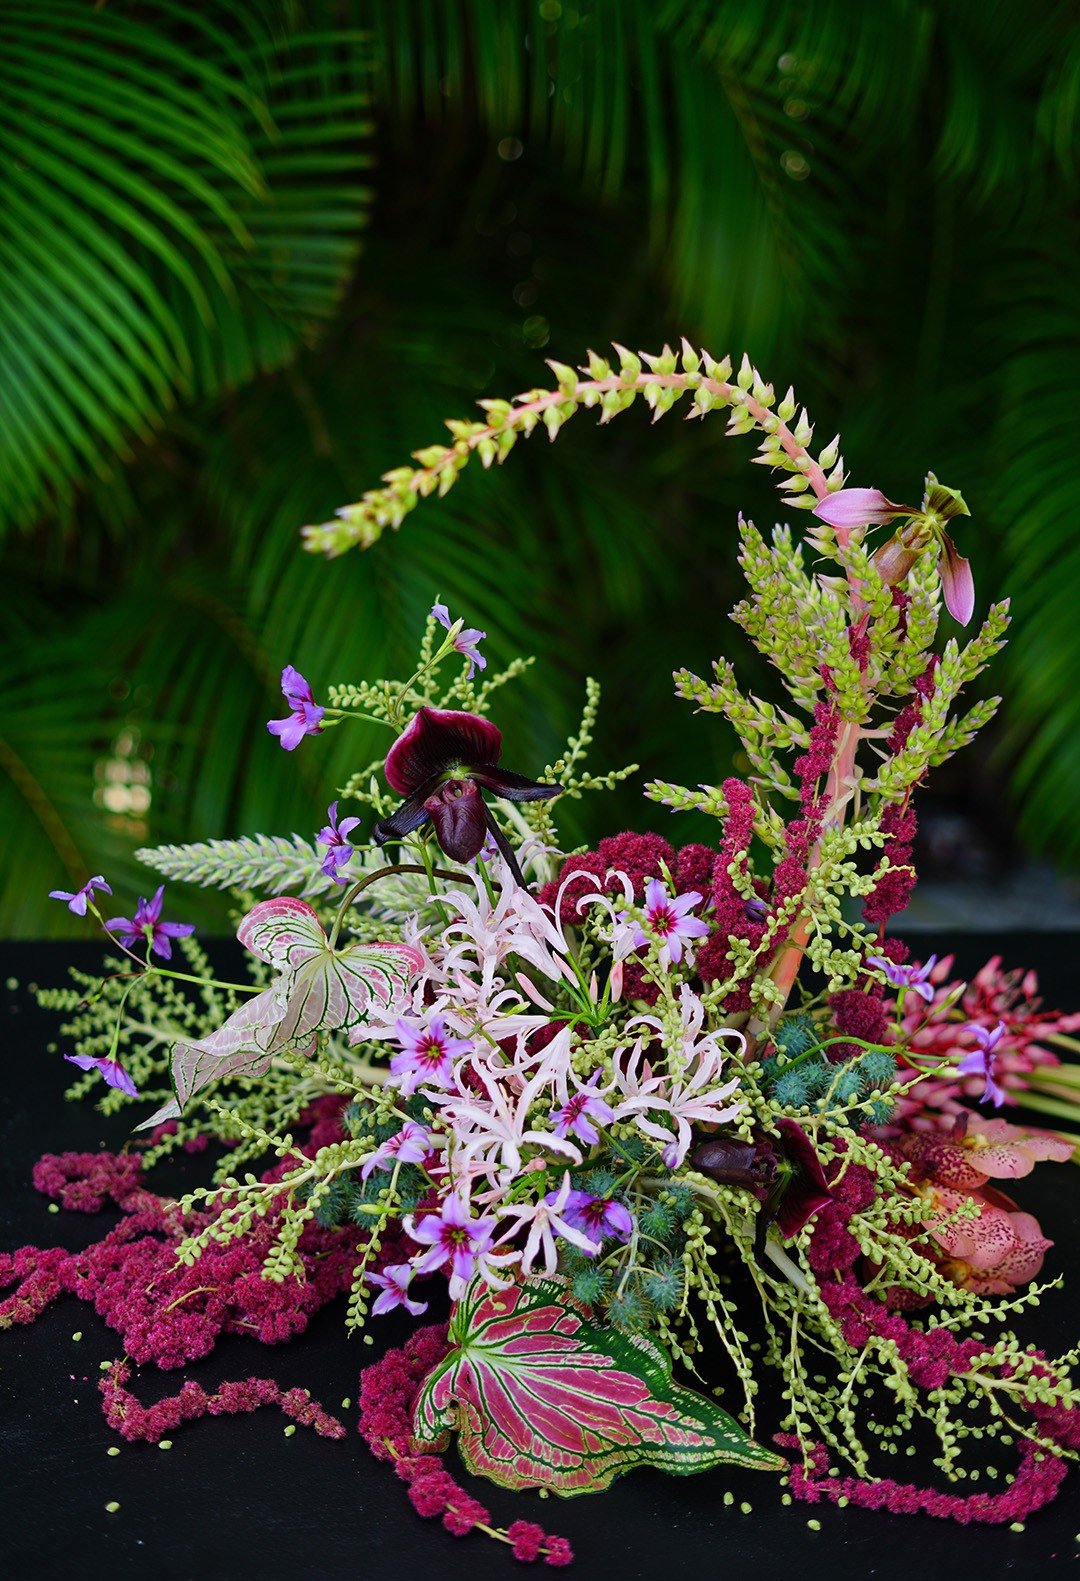 An arrangement by Jenya Flowers featuring bromelias, Lady Slipper orchids, nerine and heart-shaped caladium leaves.